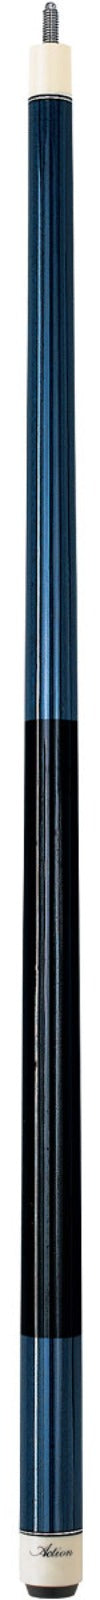 Action STR01 - Blue Pool Cue -Action